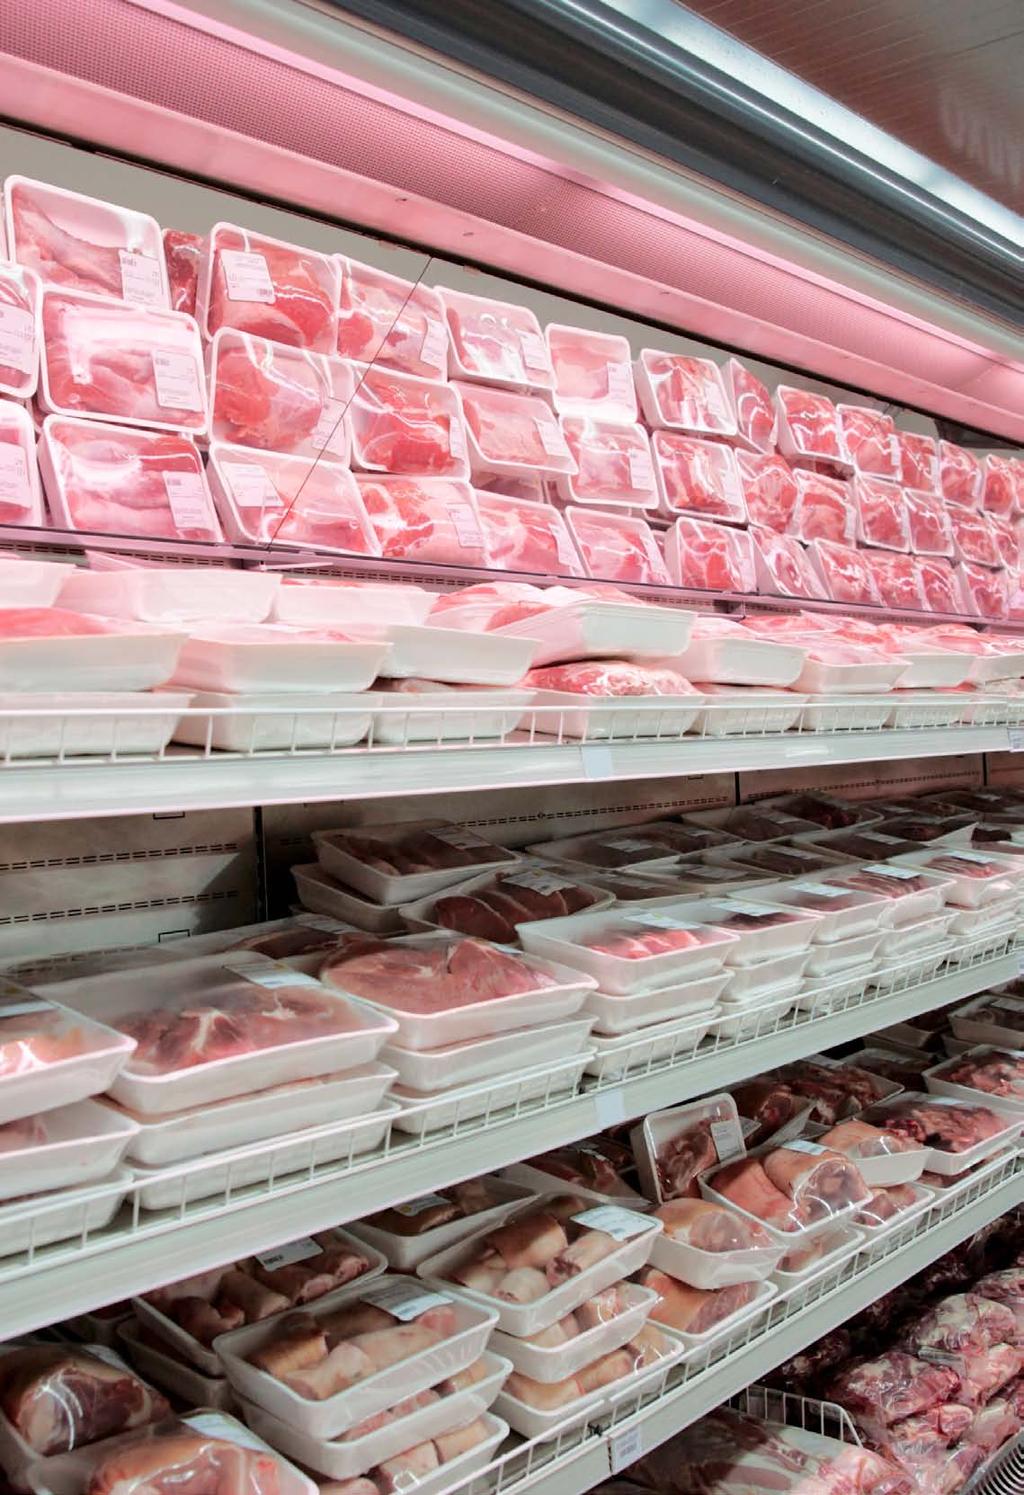 Christmas Retailer Performance in the Meat Aisle From January to November, the average amount being spent on Meat and Poultry over a 4 week period is 23.14.